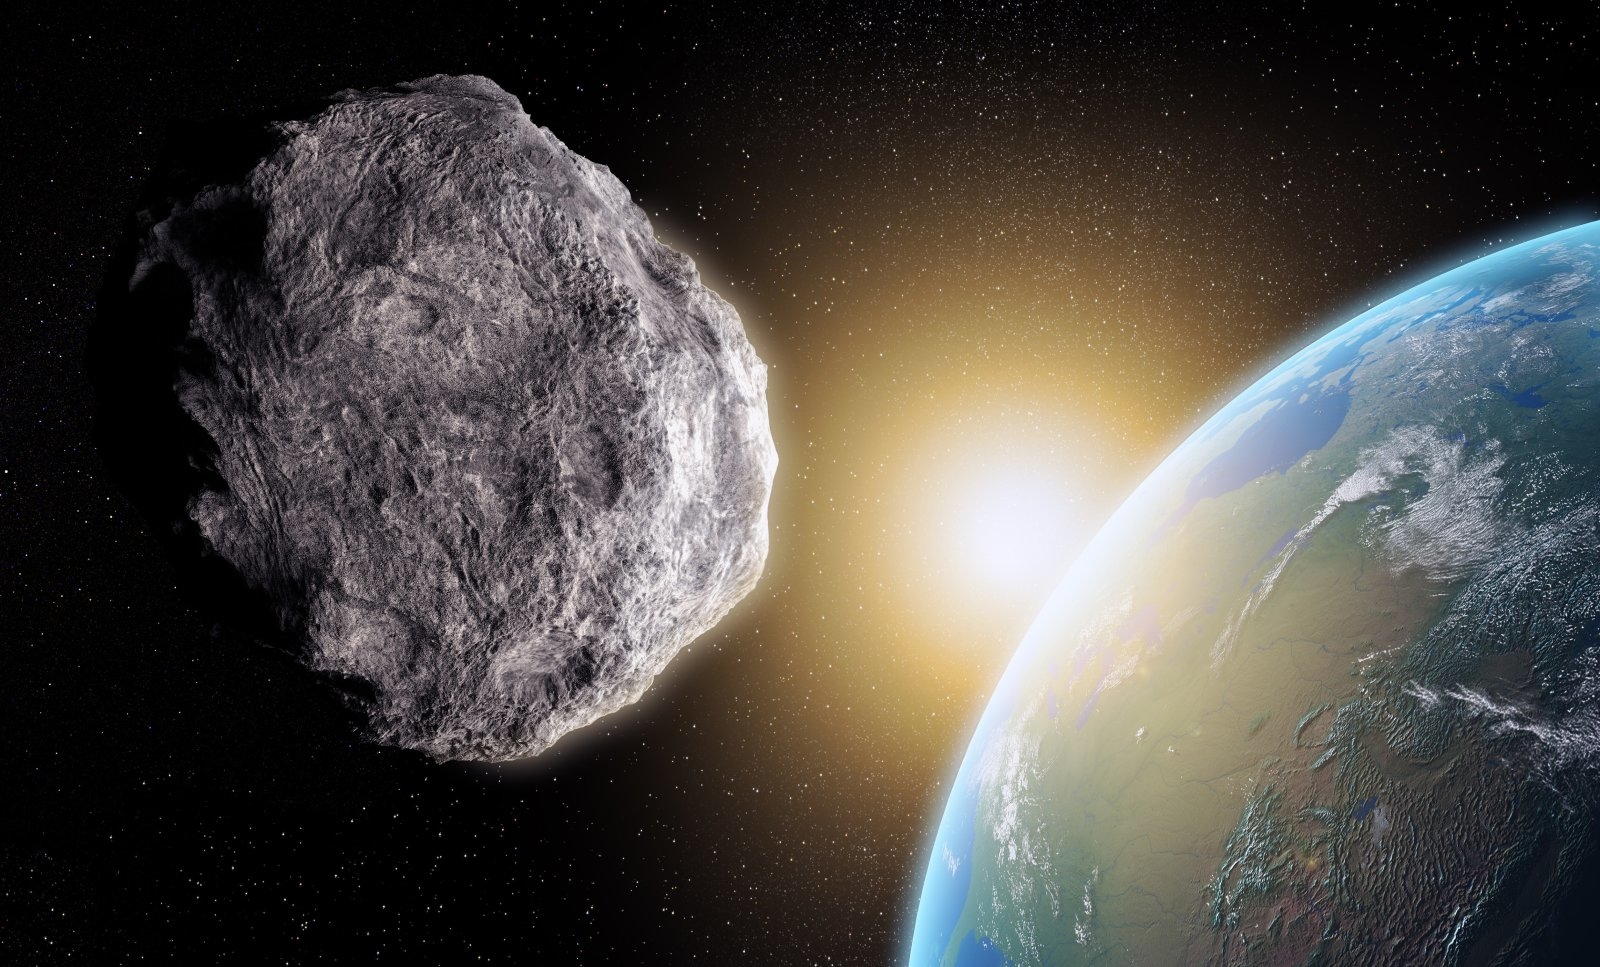 Asteroid Mining Law of Luxembourg will take effect on 1st August 2017